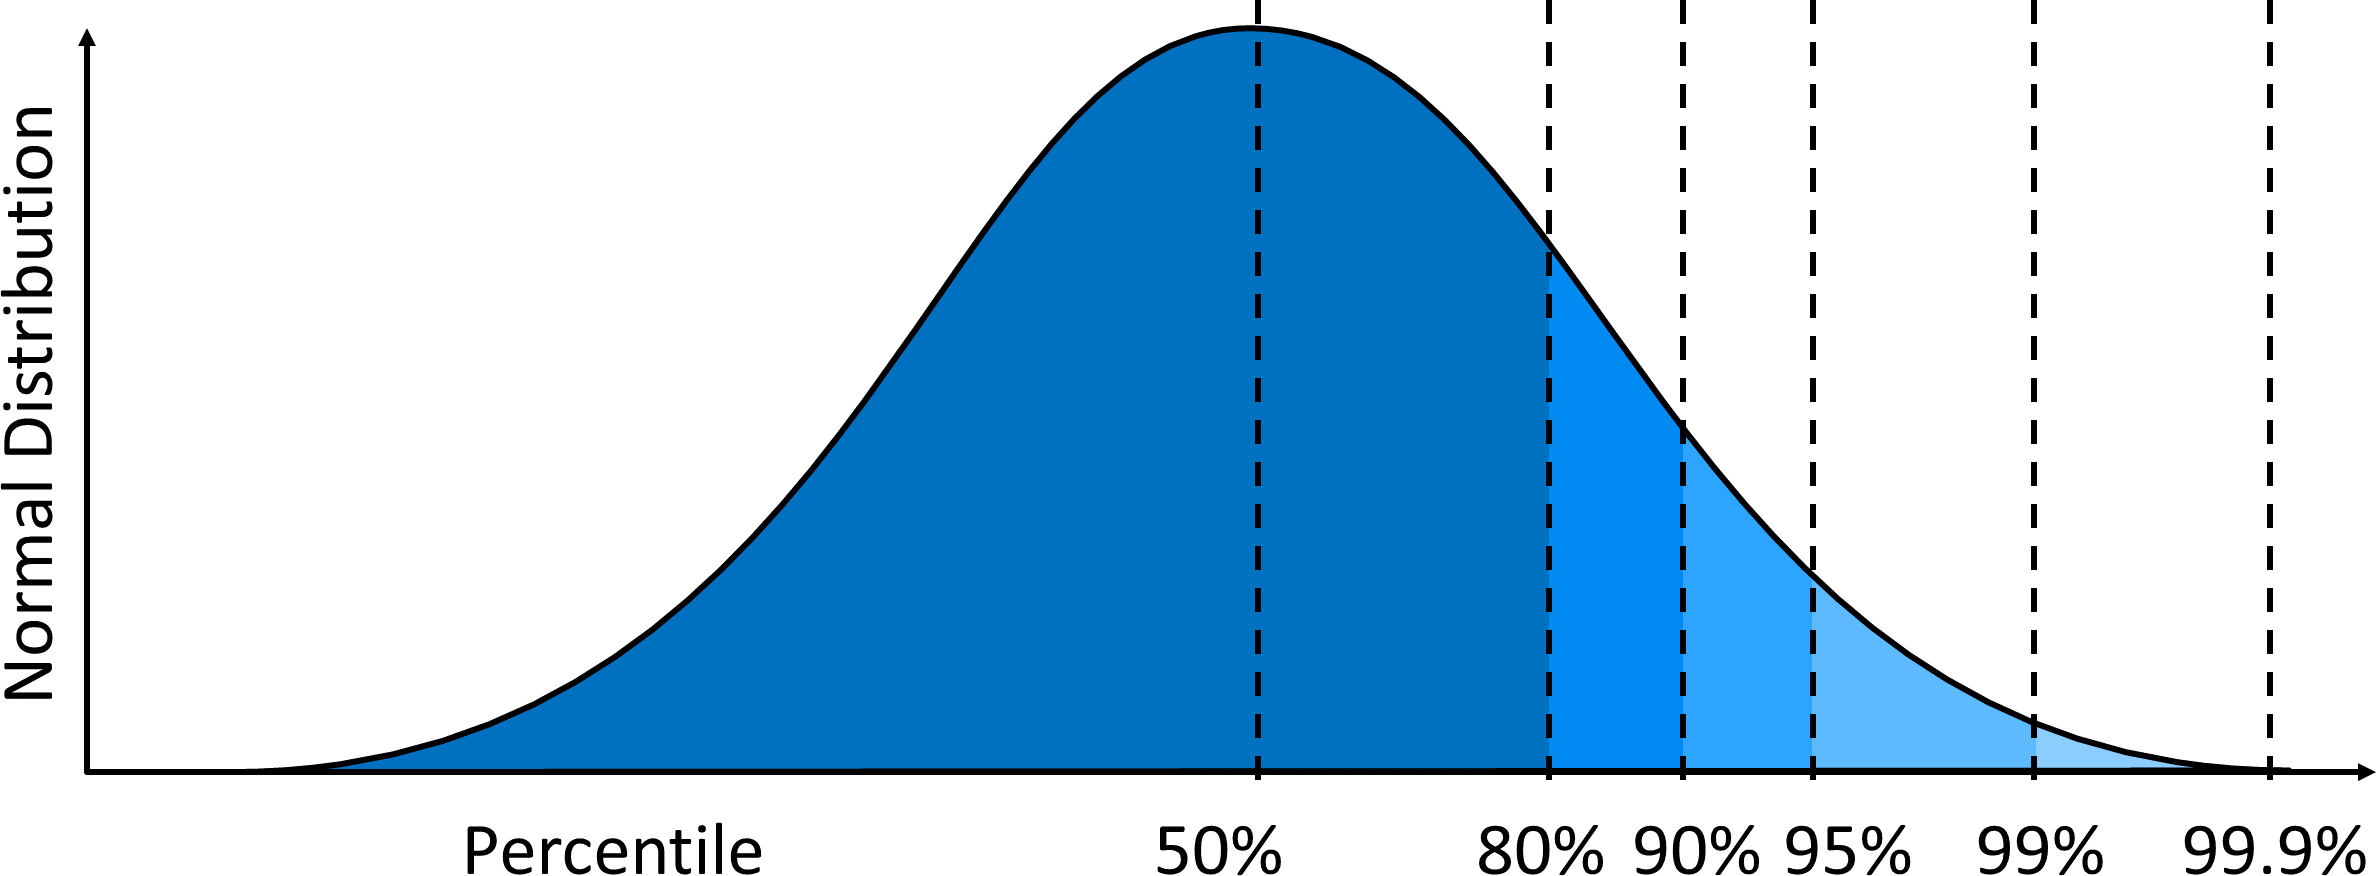 Normal-Distribution-and-Percentiles.png